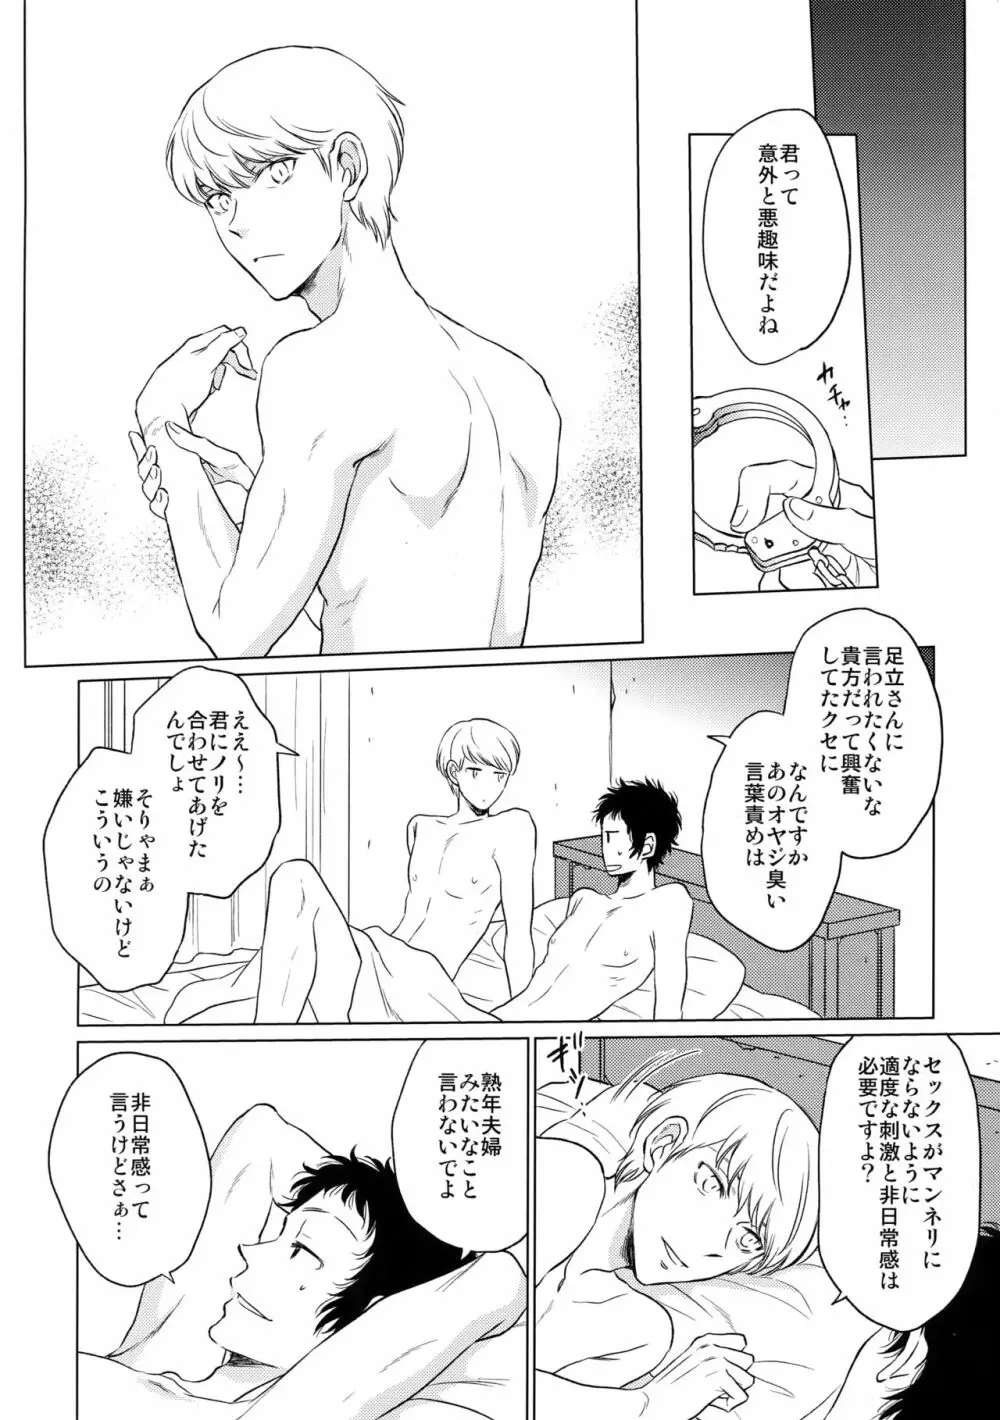 After Page.31